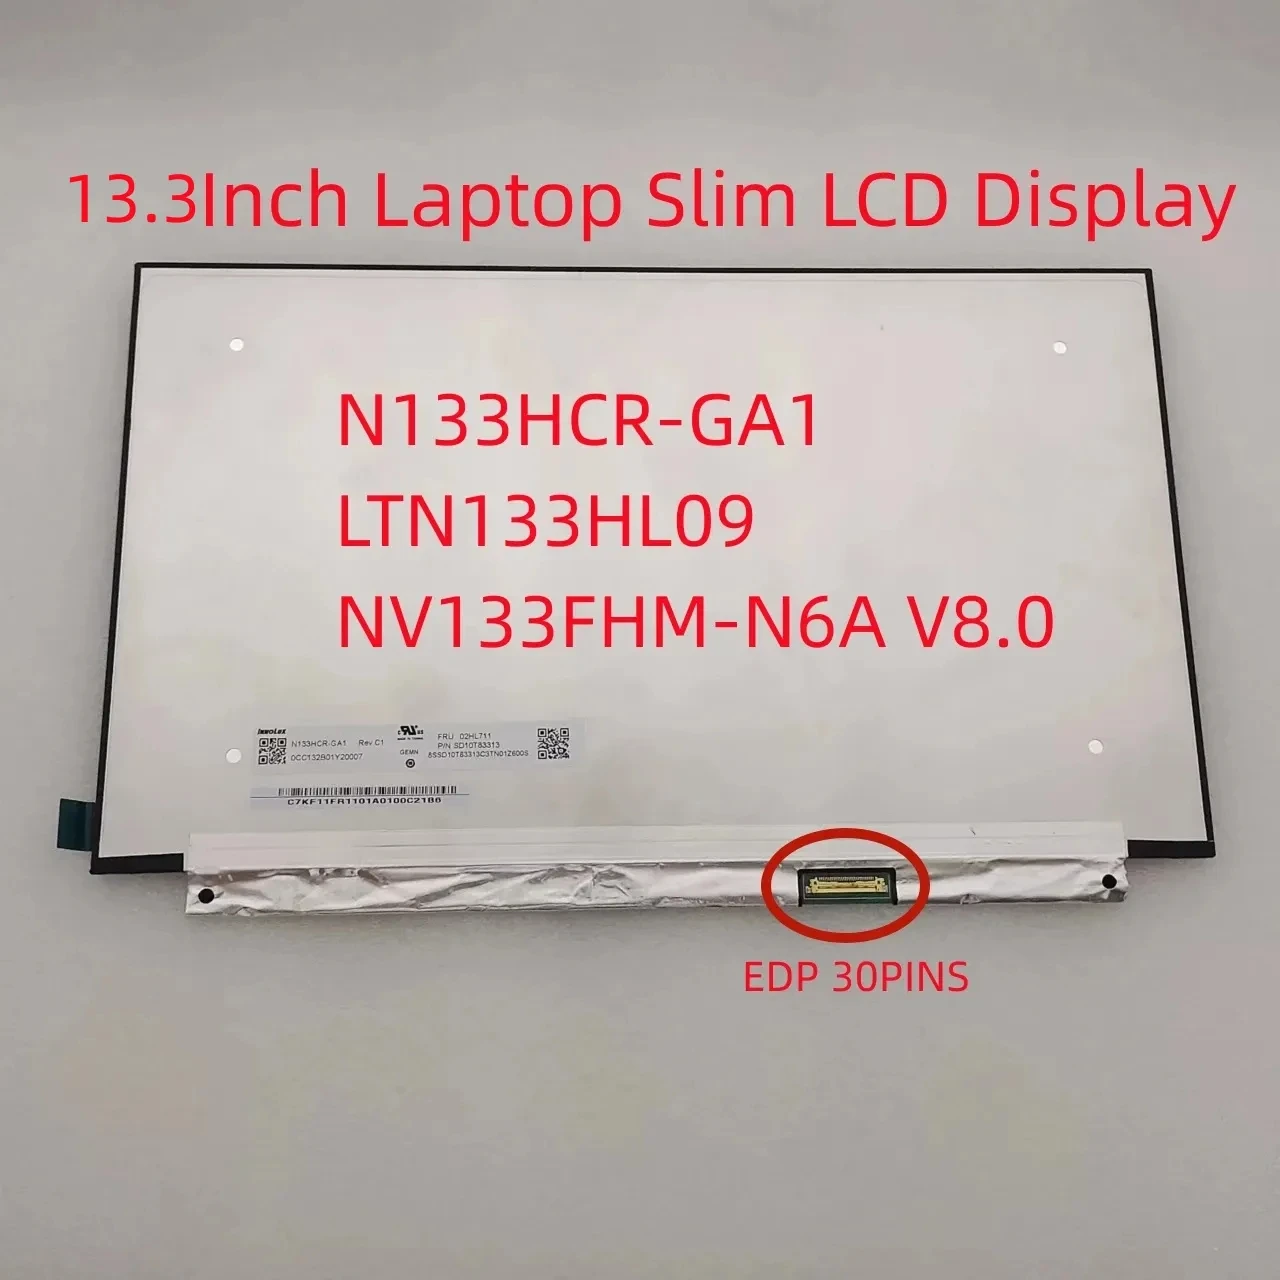 

For ThinkPad X390 X395 N133HCR-GA1 LTN133HL09 NV133FHM-N6A V8.0 13.3" FHD IPS 30pins Privacy LED LCD Display Screen Replacement